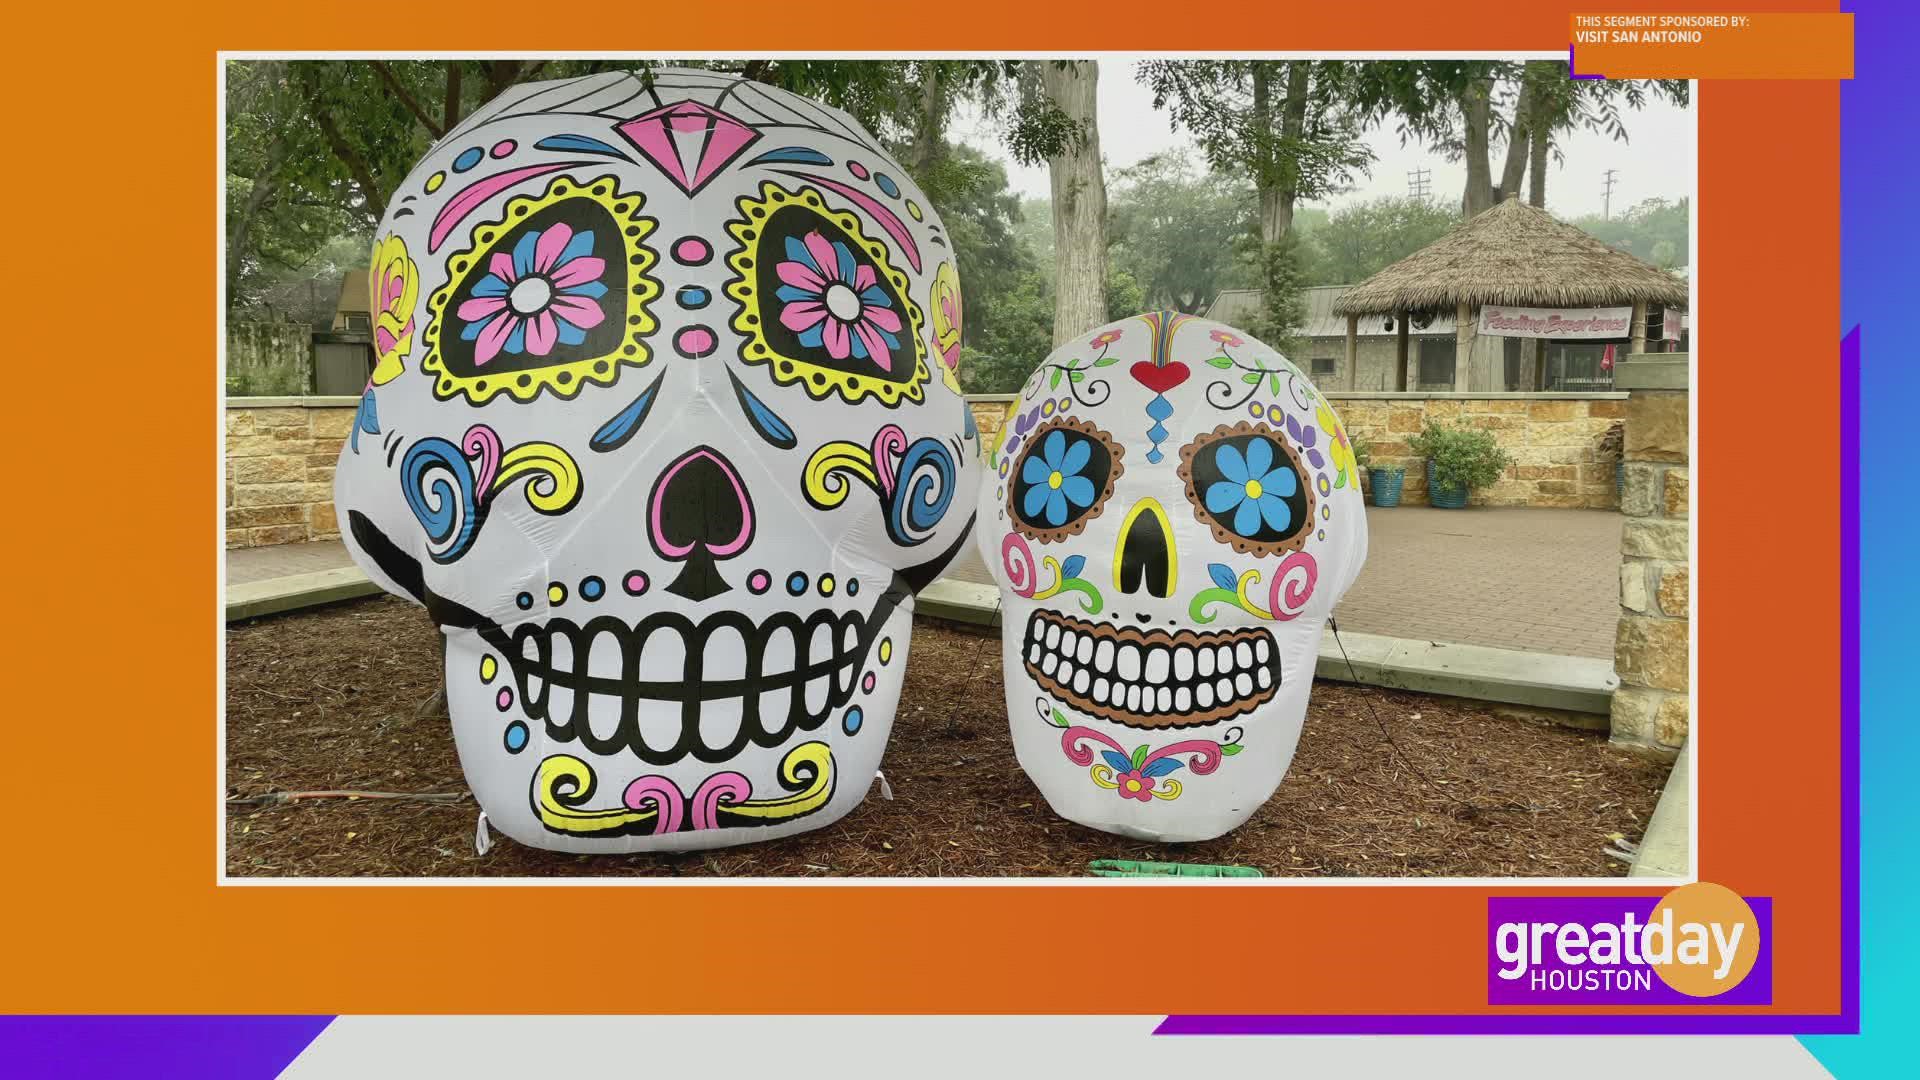 David Gonzalez shared all of the fun activities to take part in at the Dia De Los Muertos festival in San Antonio.